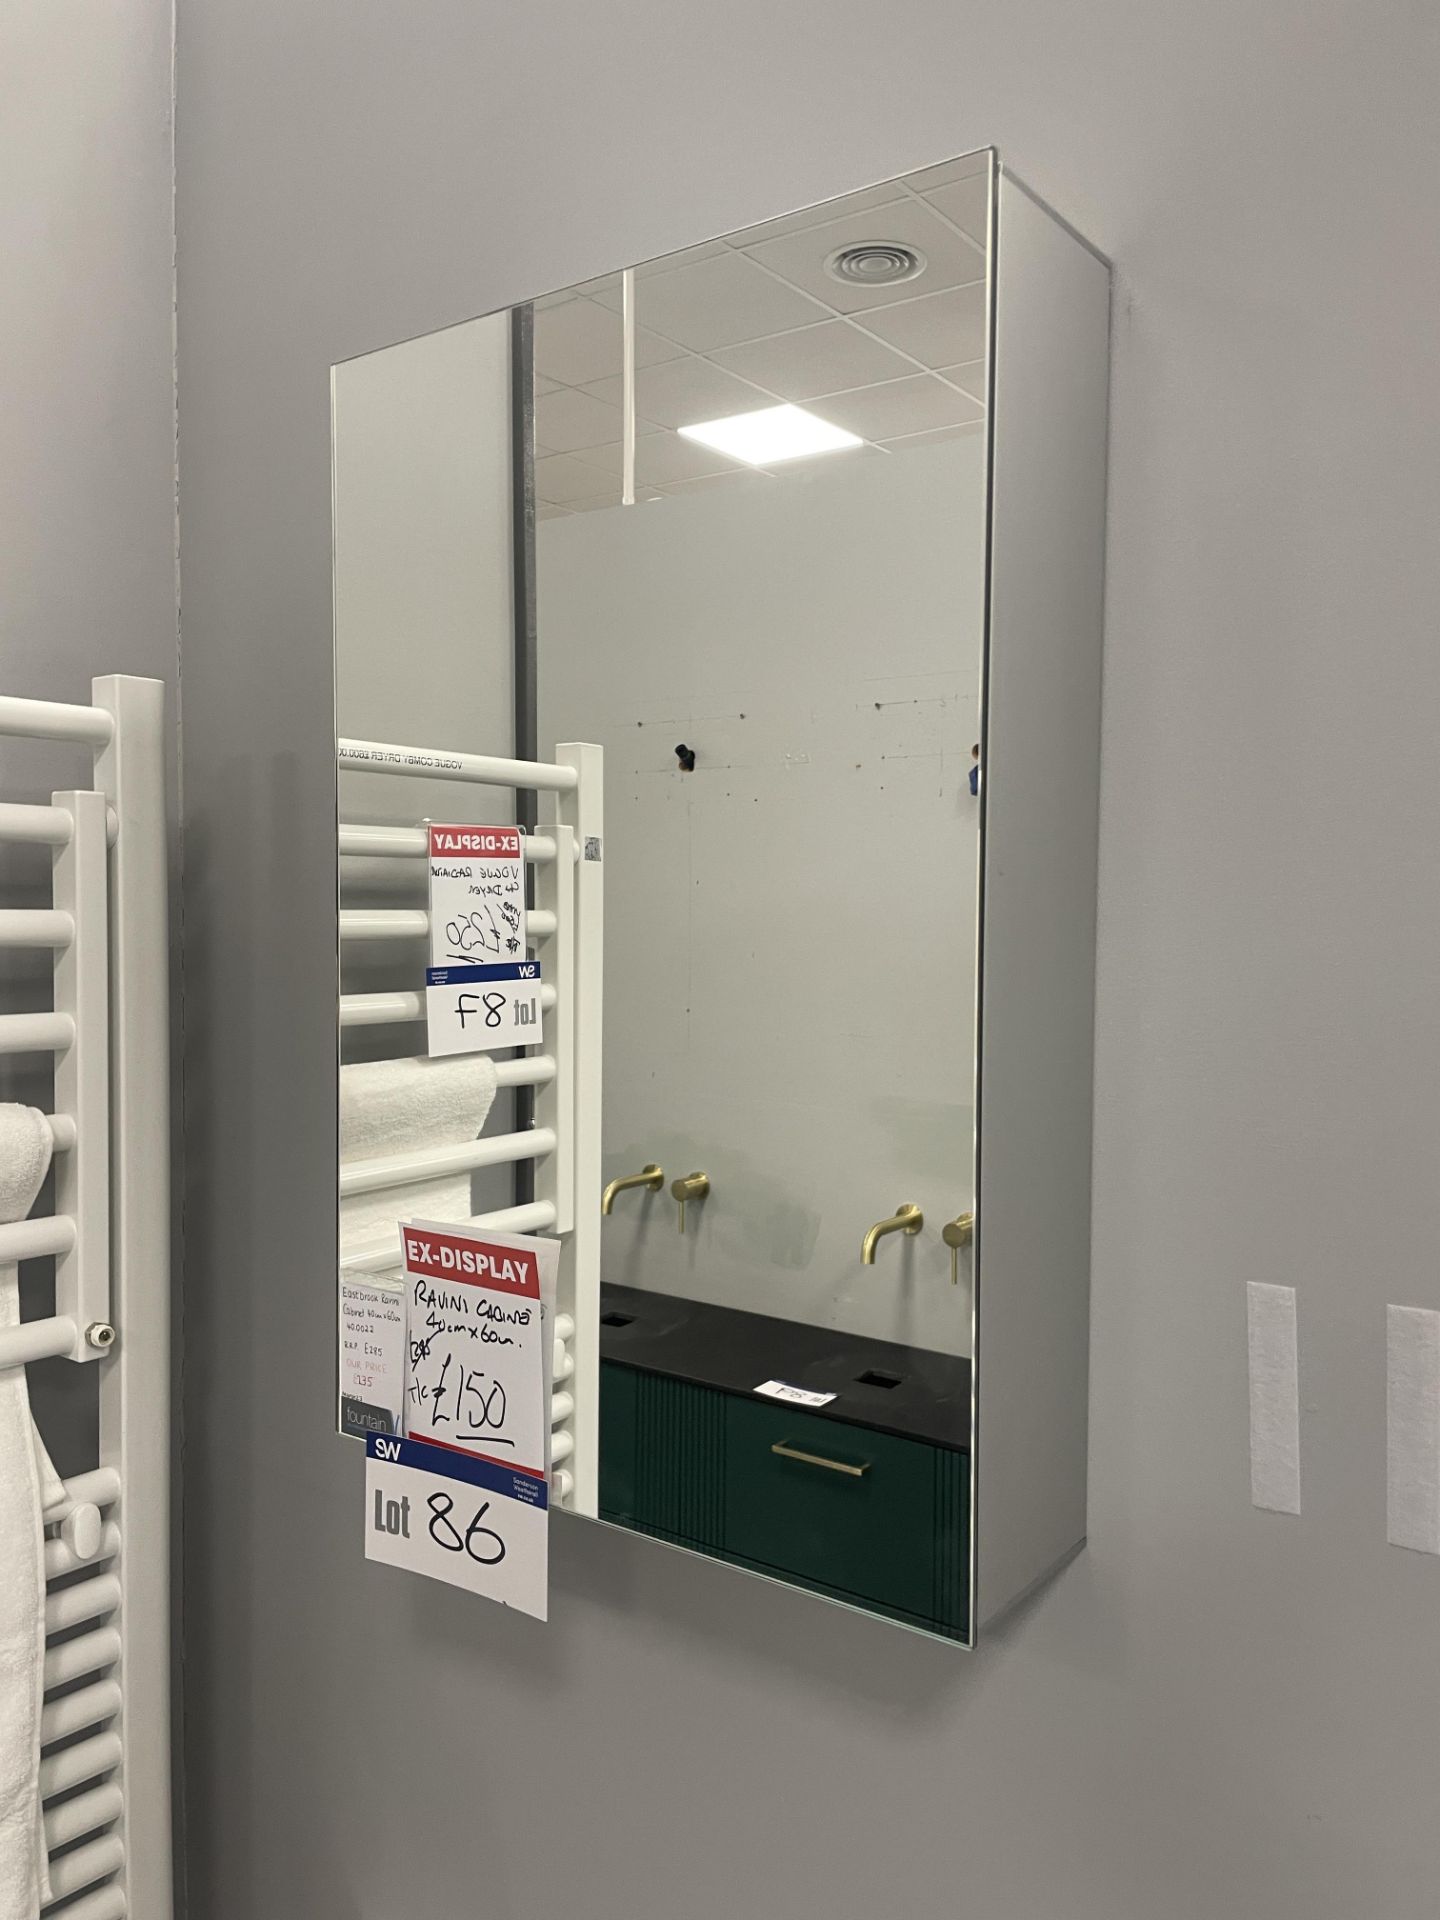 Eastbrooke Ravina Mirrored Cabinet, approx. 600mm x 400mm Please read the following important